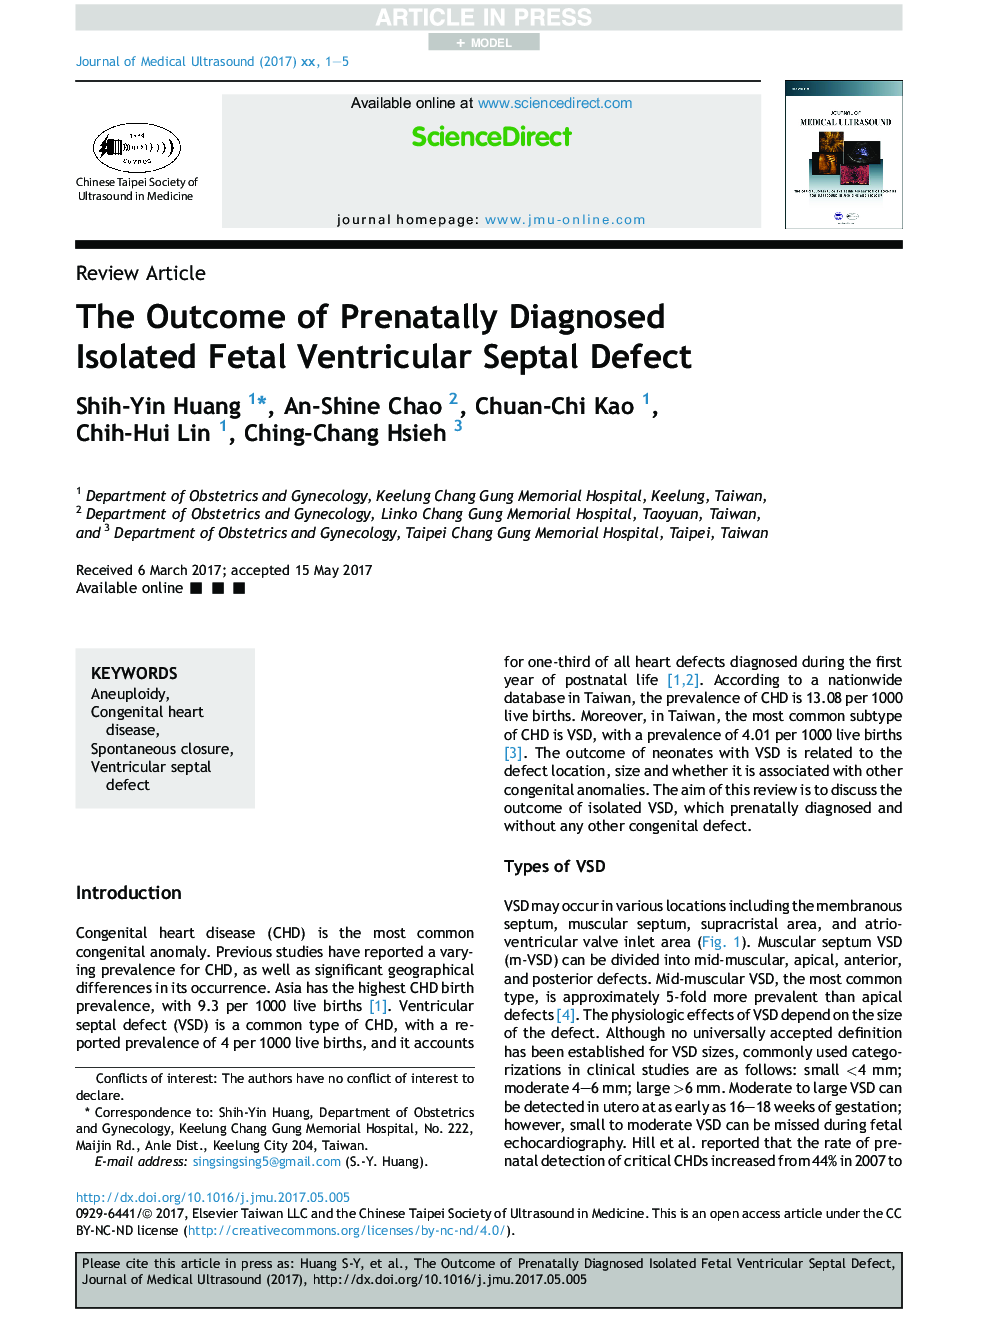 The Outcome of Prenatally Diagnosed Isolated Fetal Ventricular Septal Defect